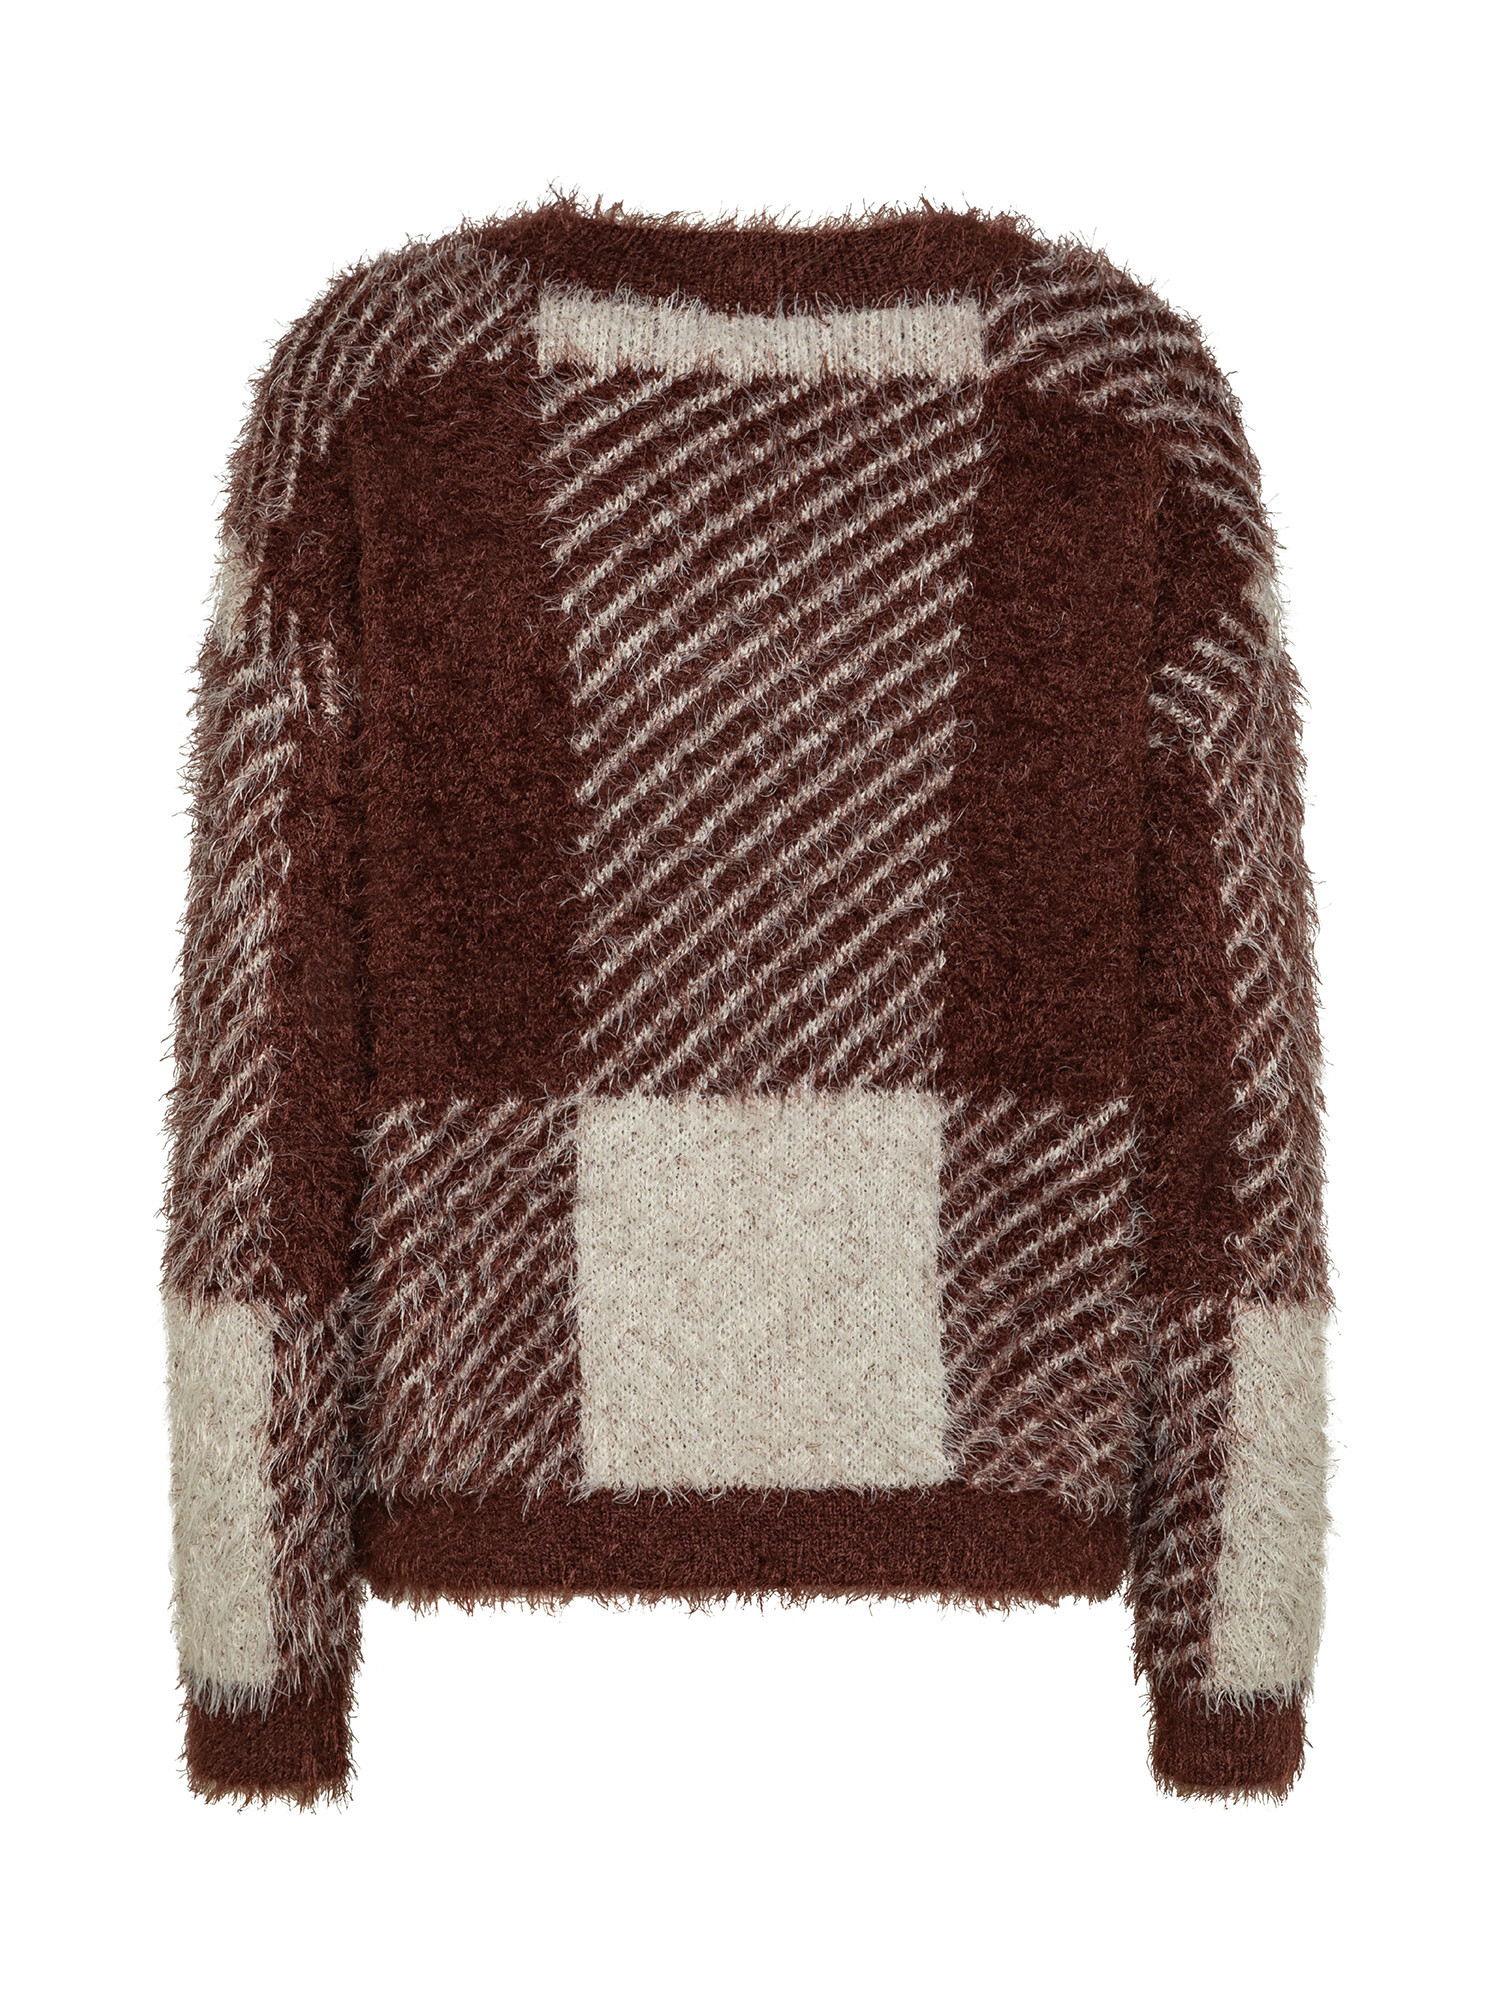 Koan - Checked crewneck pullover, Brown, large image number 1